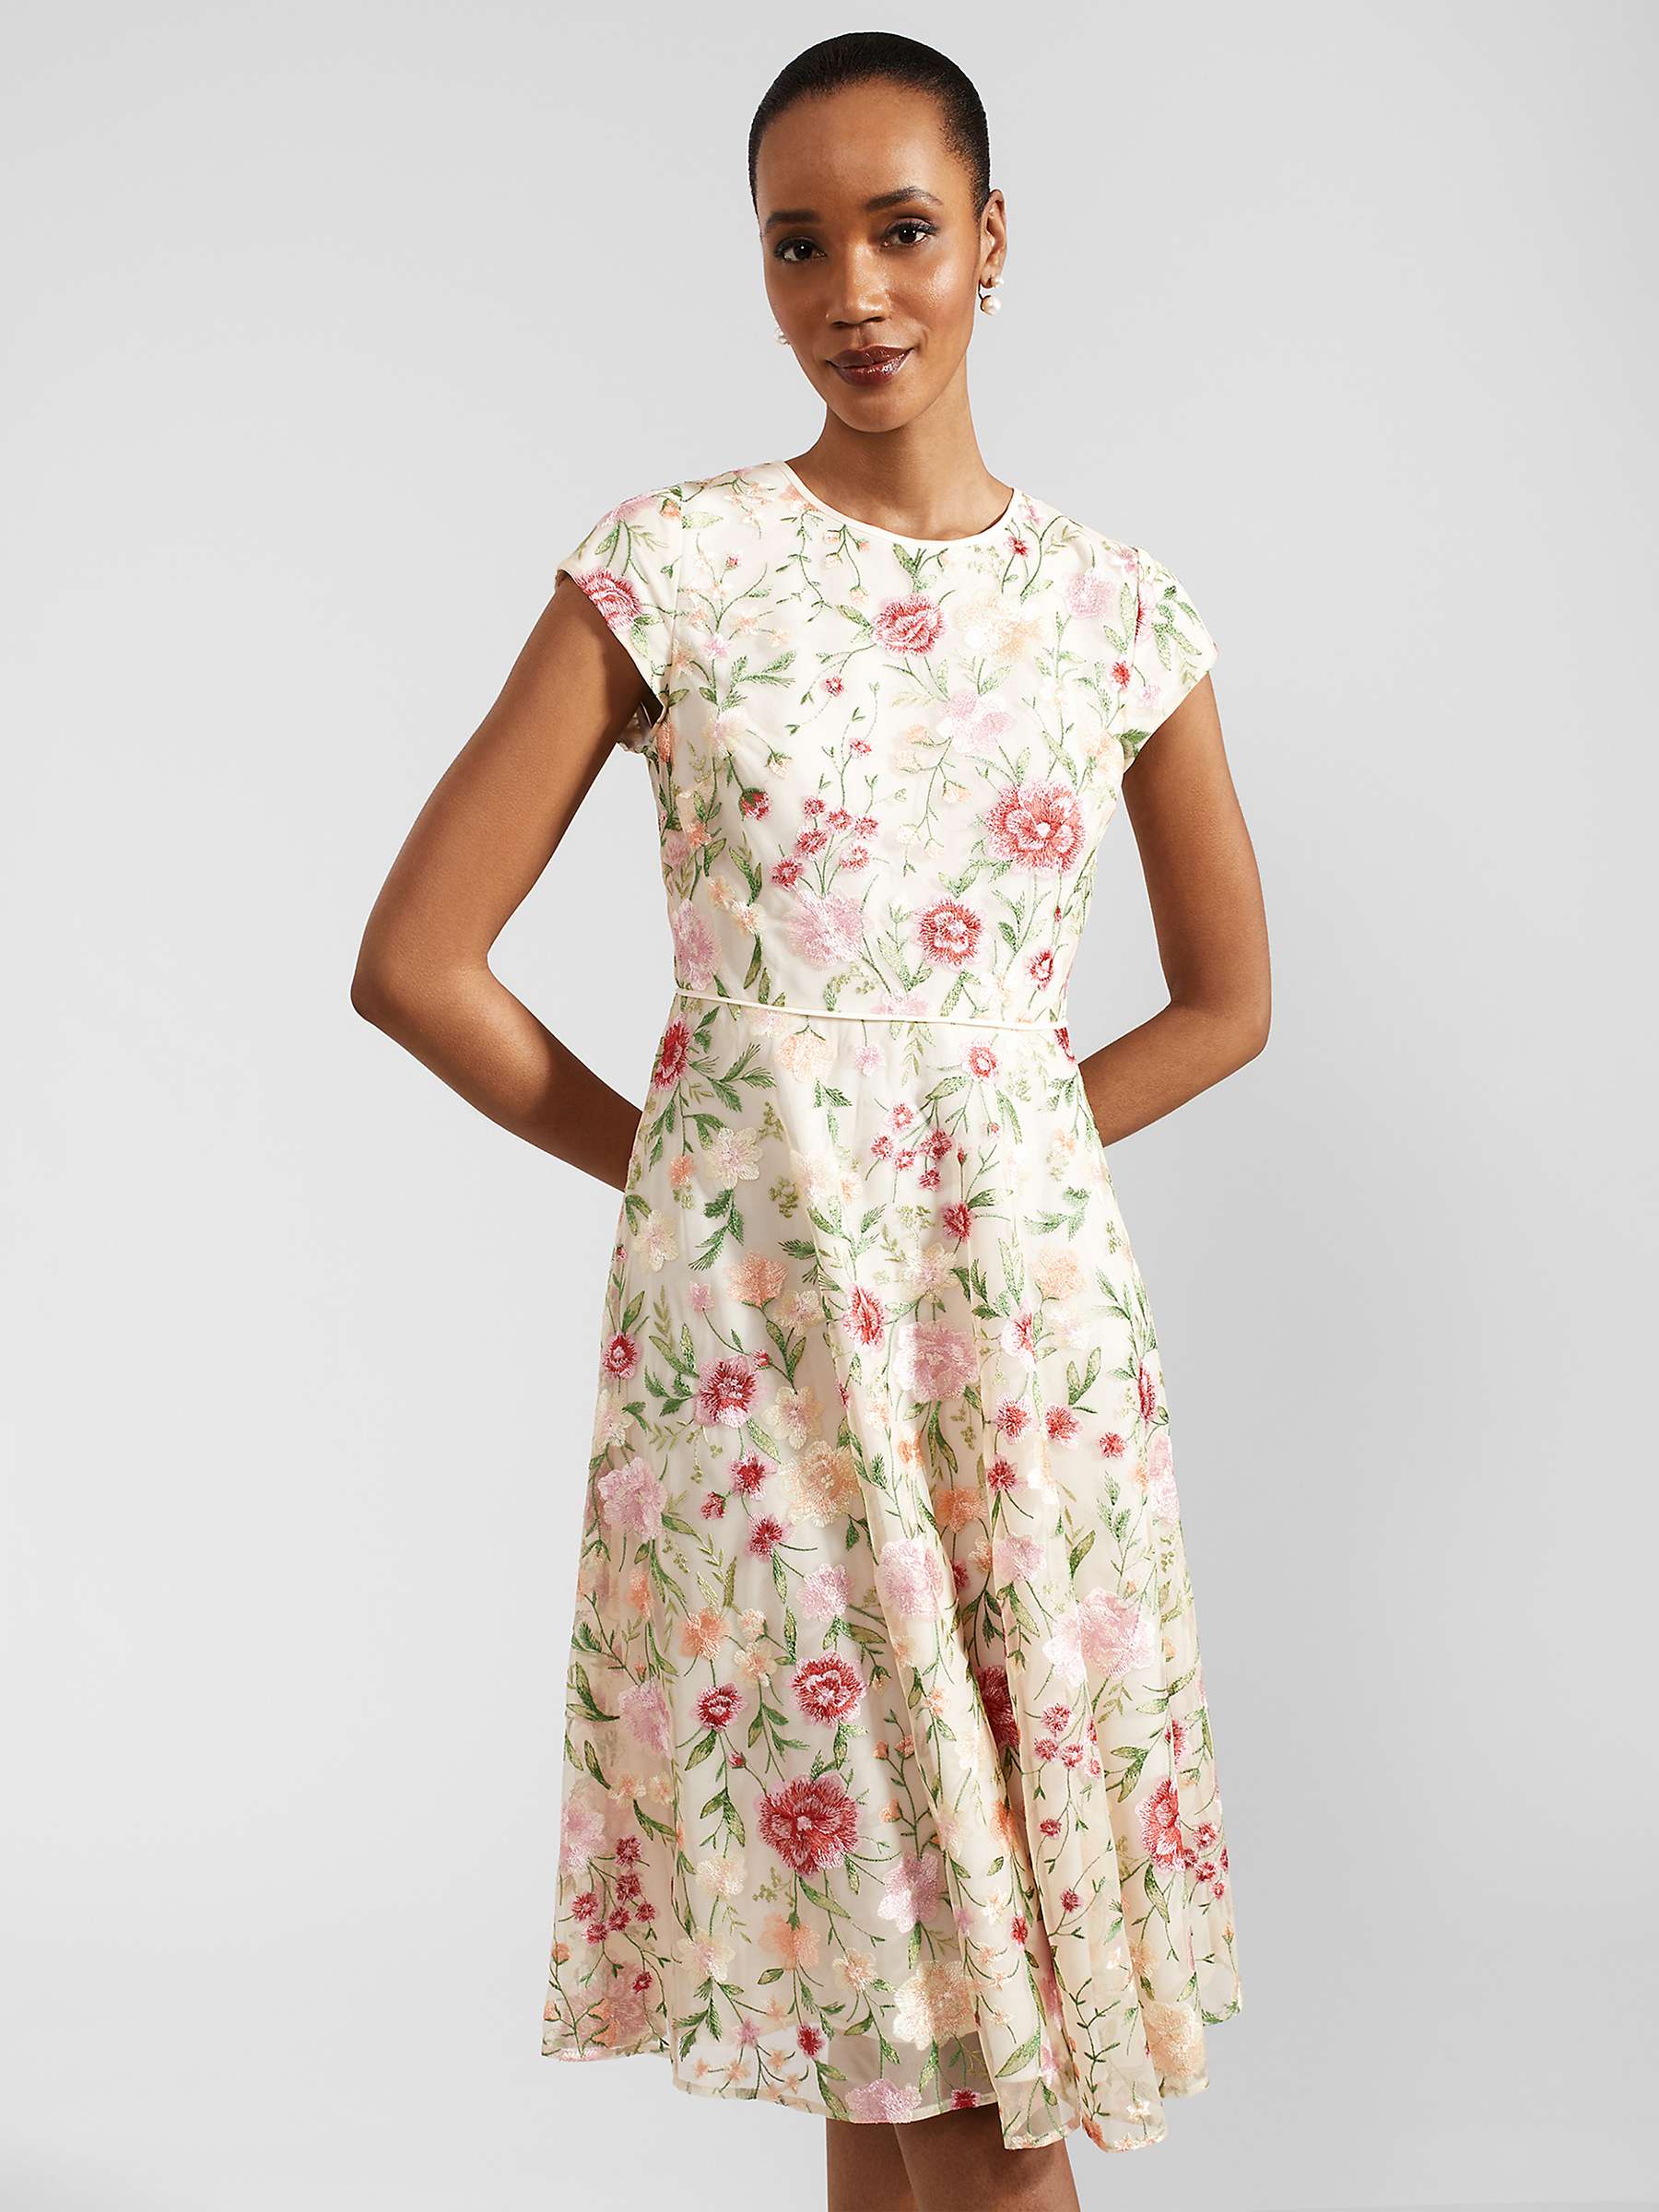 Buy Hobbs Tia Floral Embroidery Dress, Cream/Multi Online at johnlewis.com